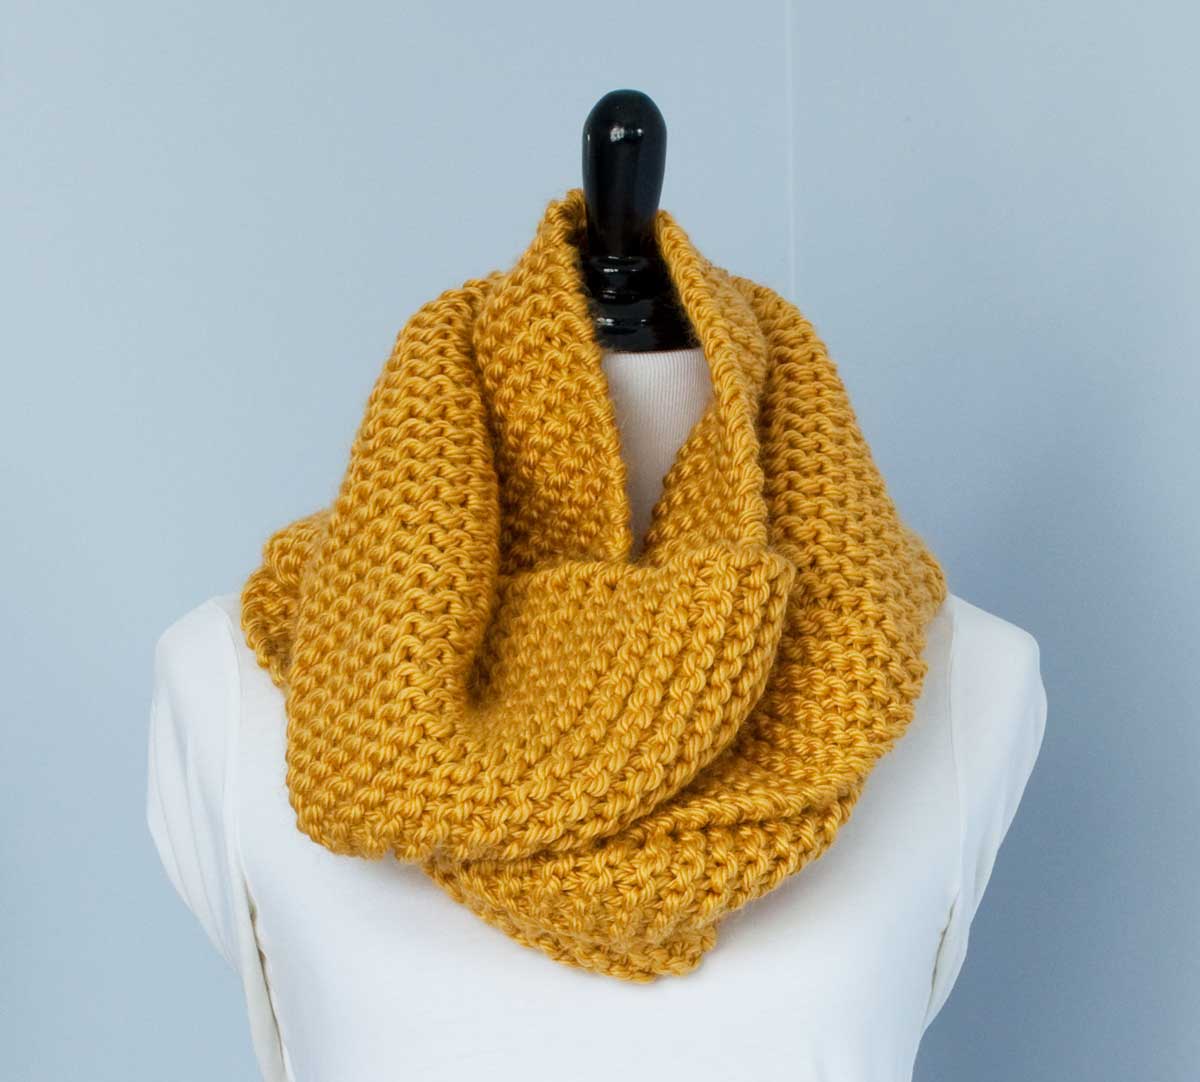 Close-up of mustard yellow scarf knit in garter stitch, wrapped around a a dress-makers dummy.